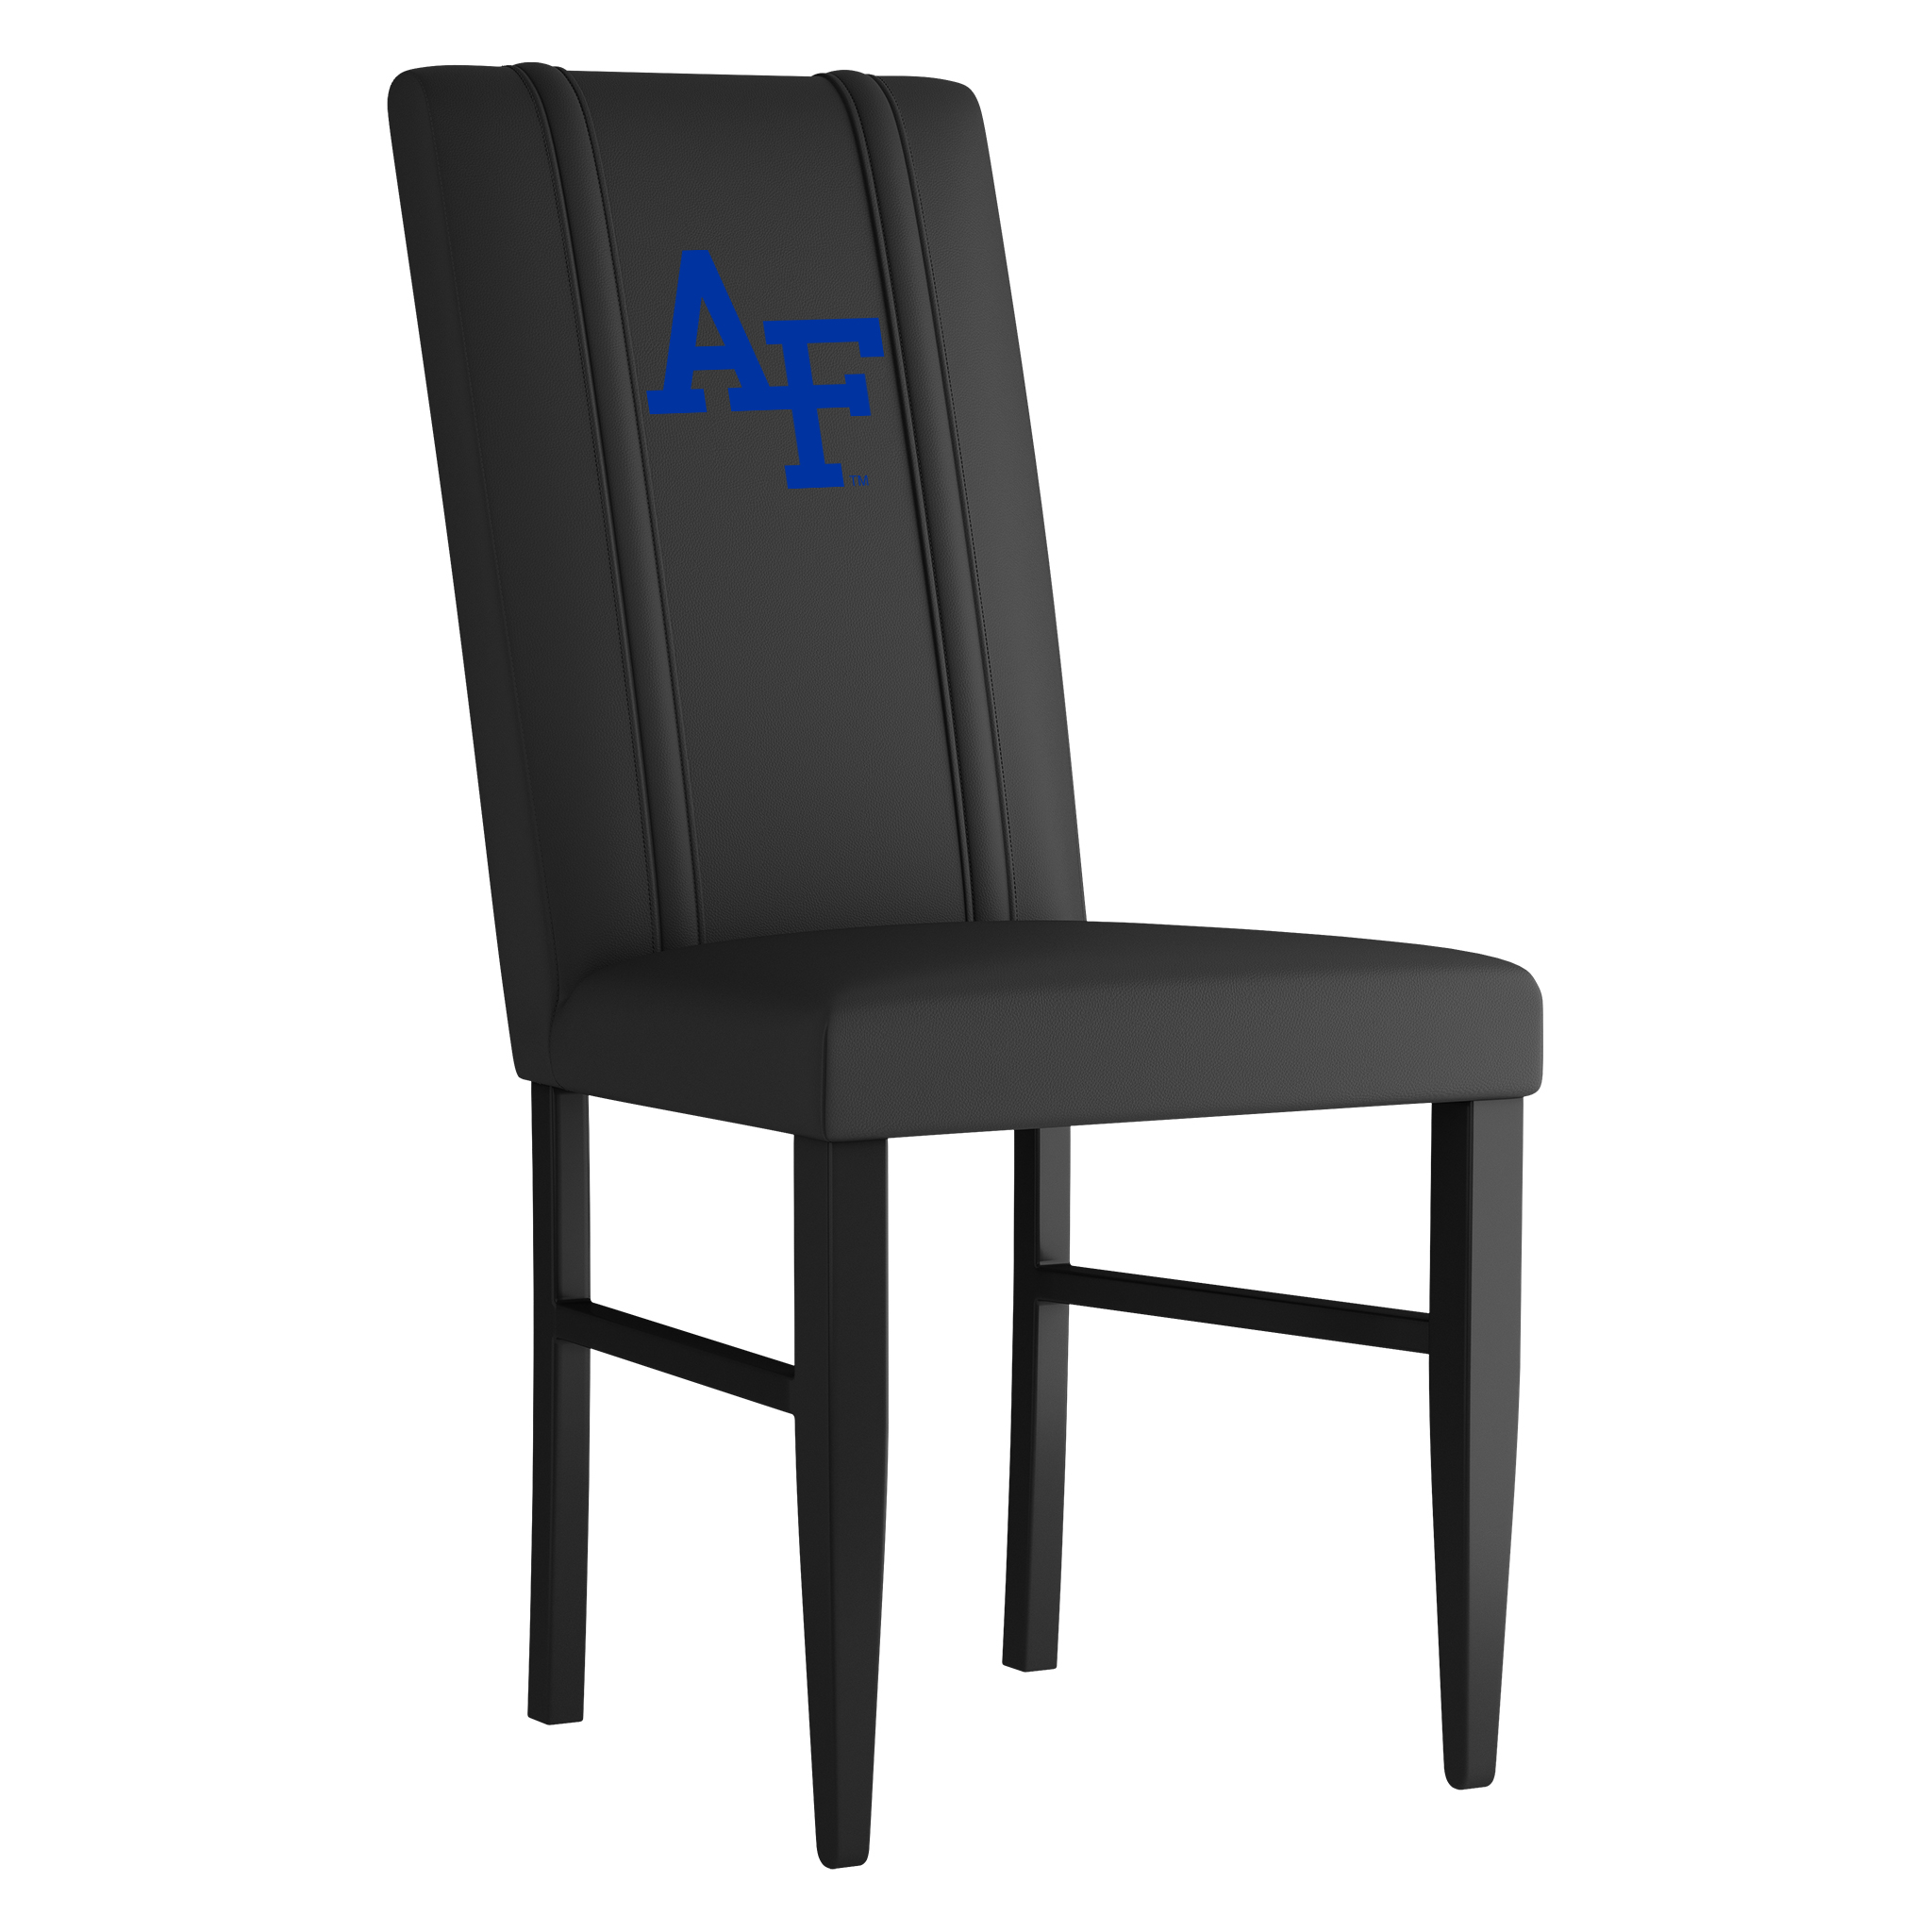 Air Force Falcons Side Chair 2000 With Air Force Falcons Logo